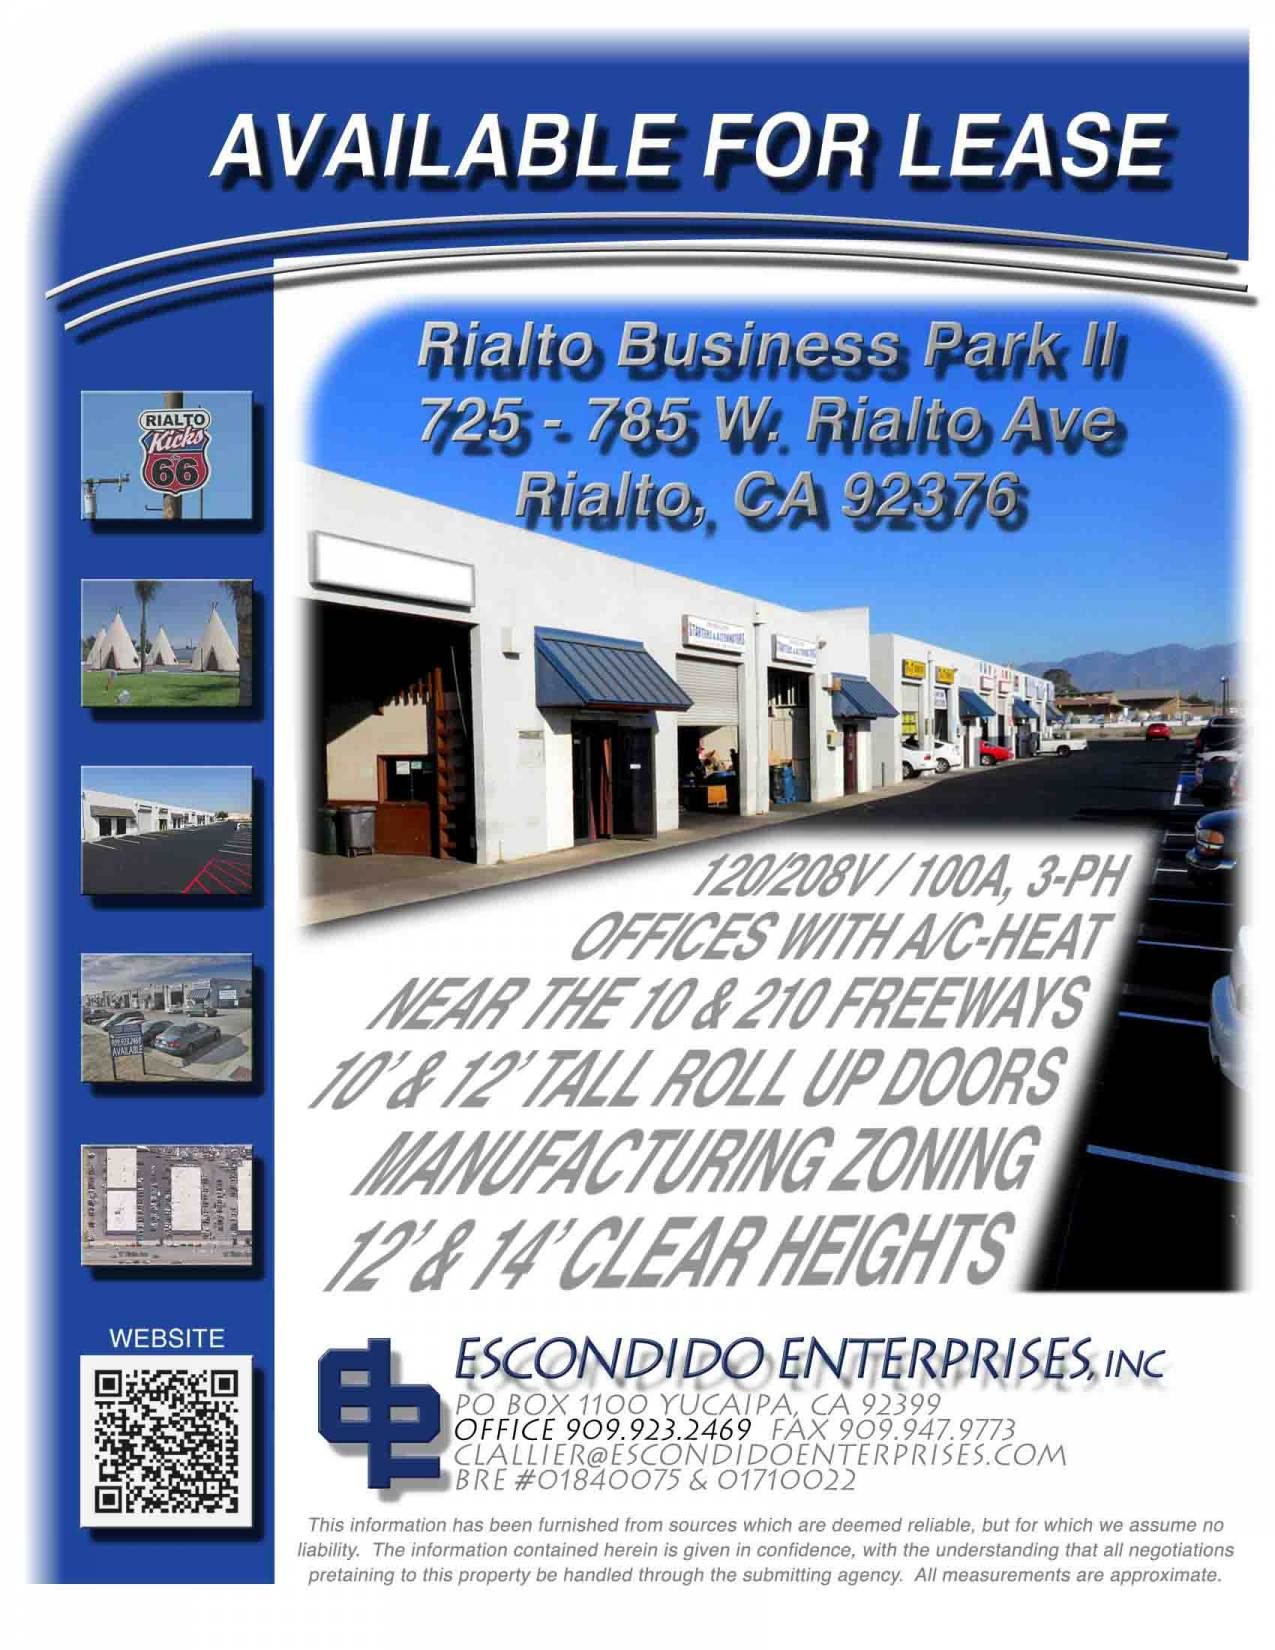 Ground level photo of industrial warehouse property located at 725, 735, 755, 775, 785, w. rialto ave, rialto, CA, 92376